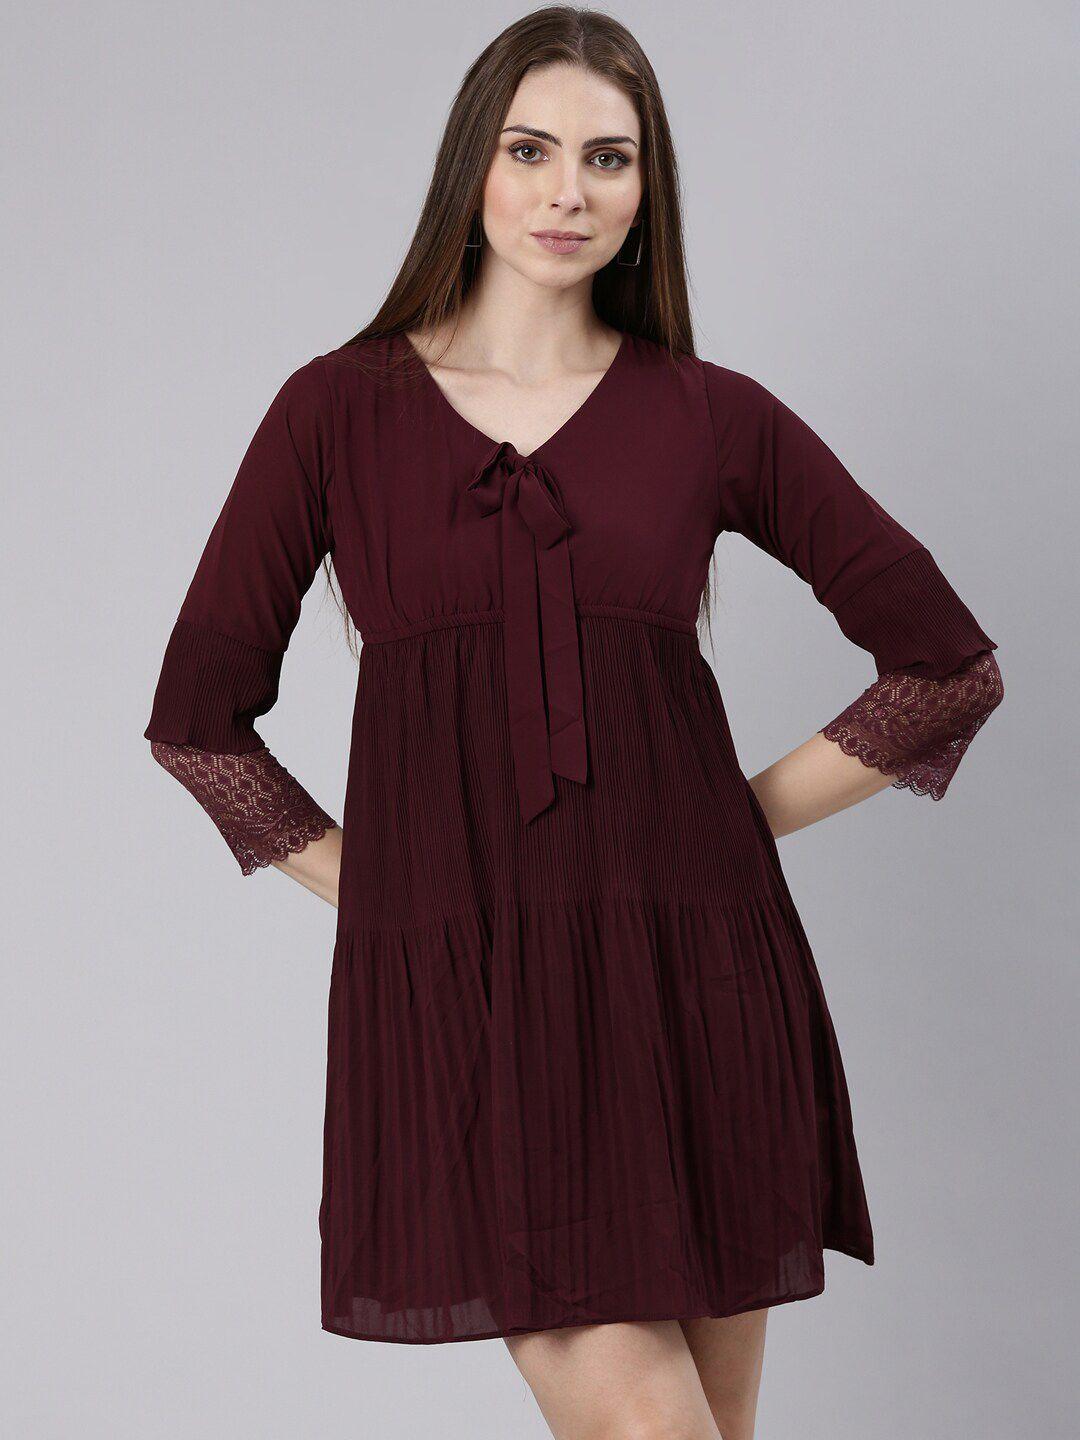 showoff tie-up neck bell sleeves gathered or pleated georgette empire dress